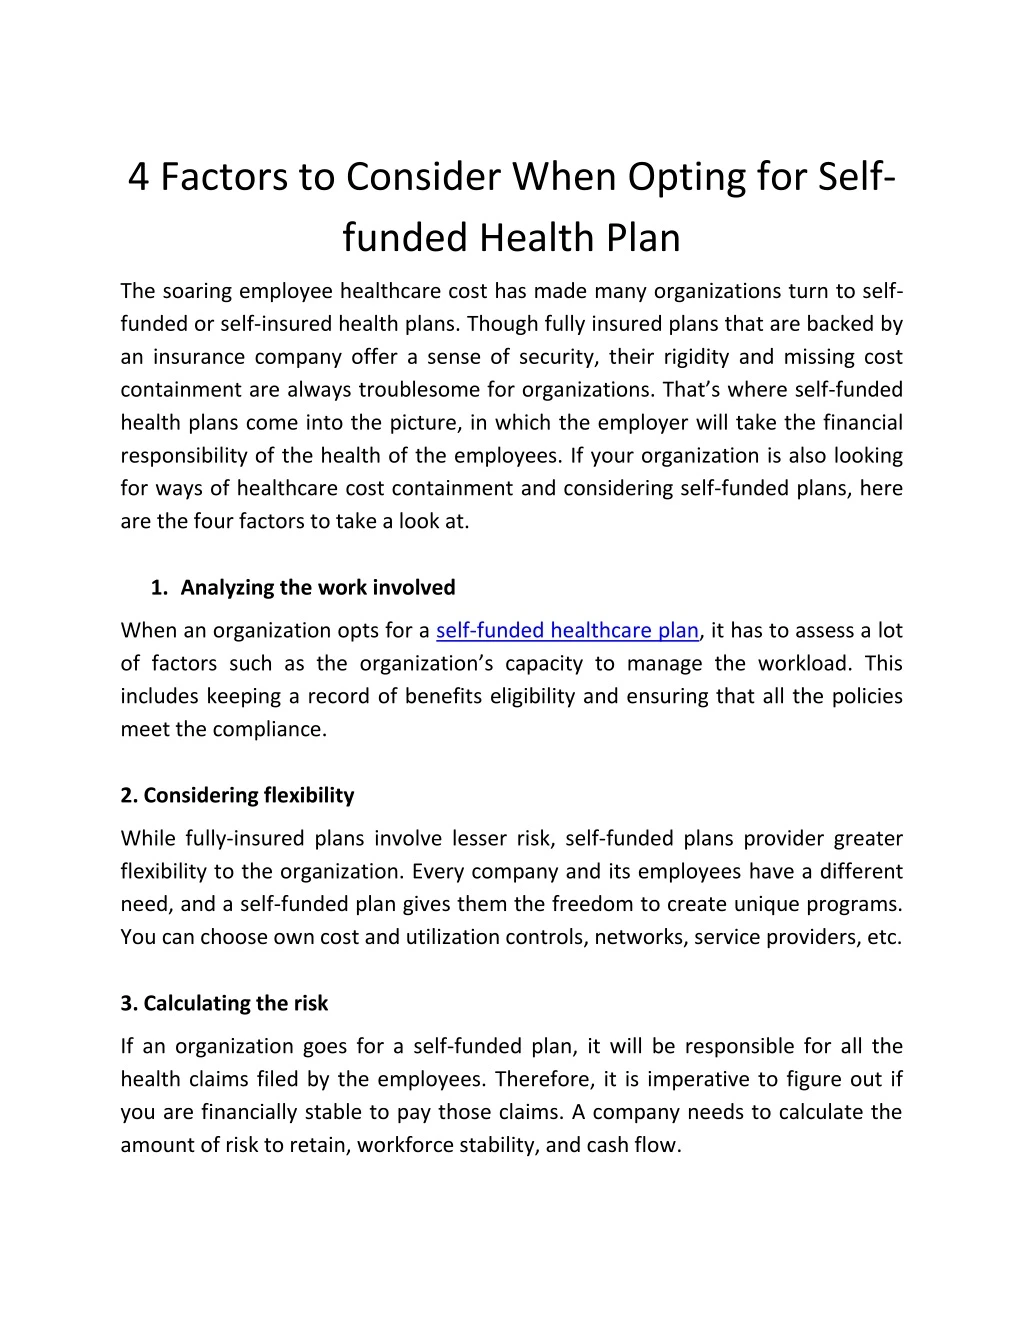 4 factors to consider when opting for self funded